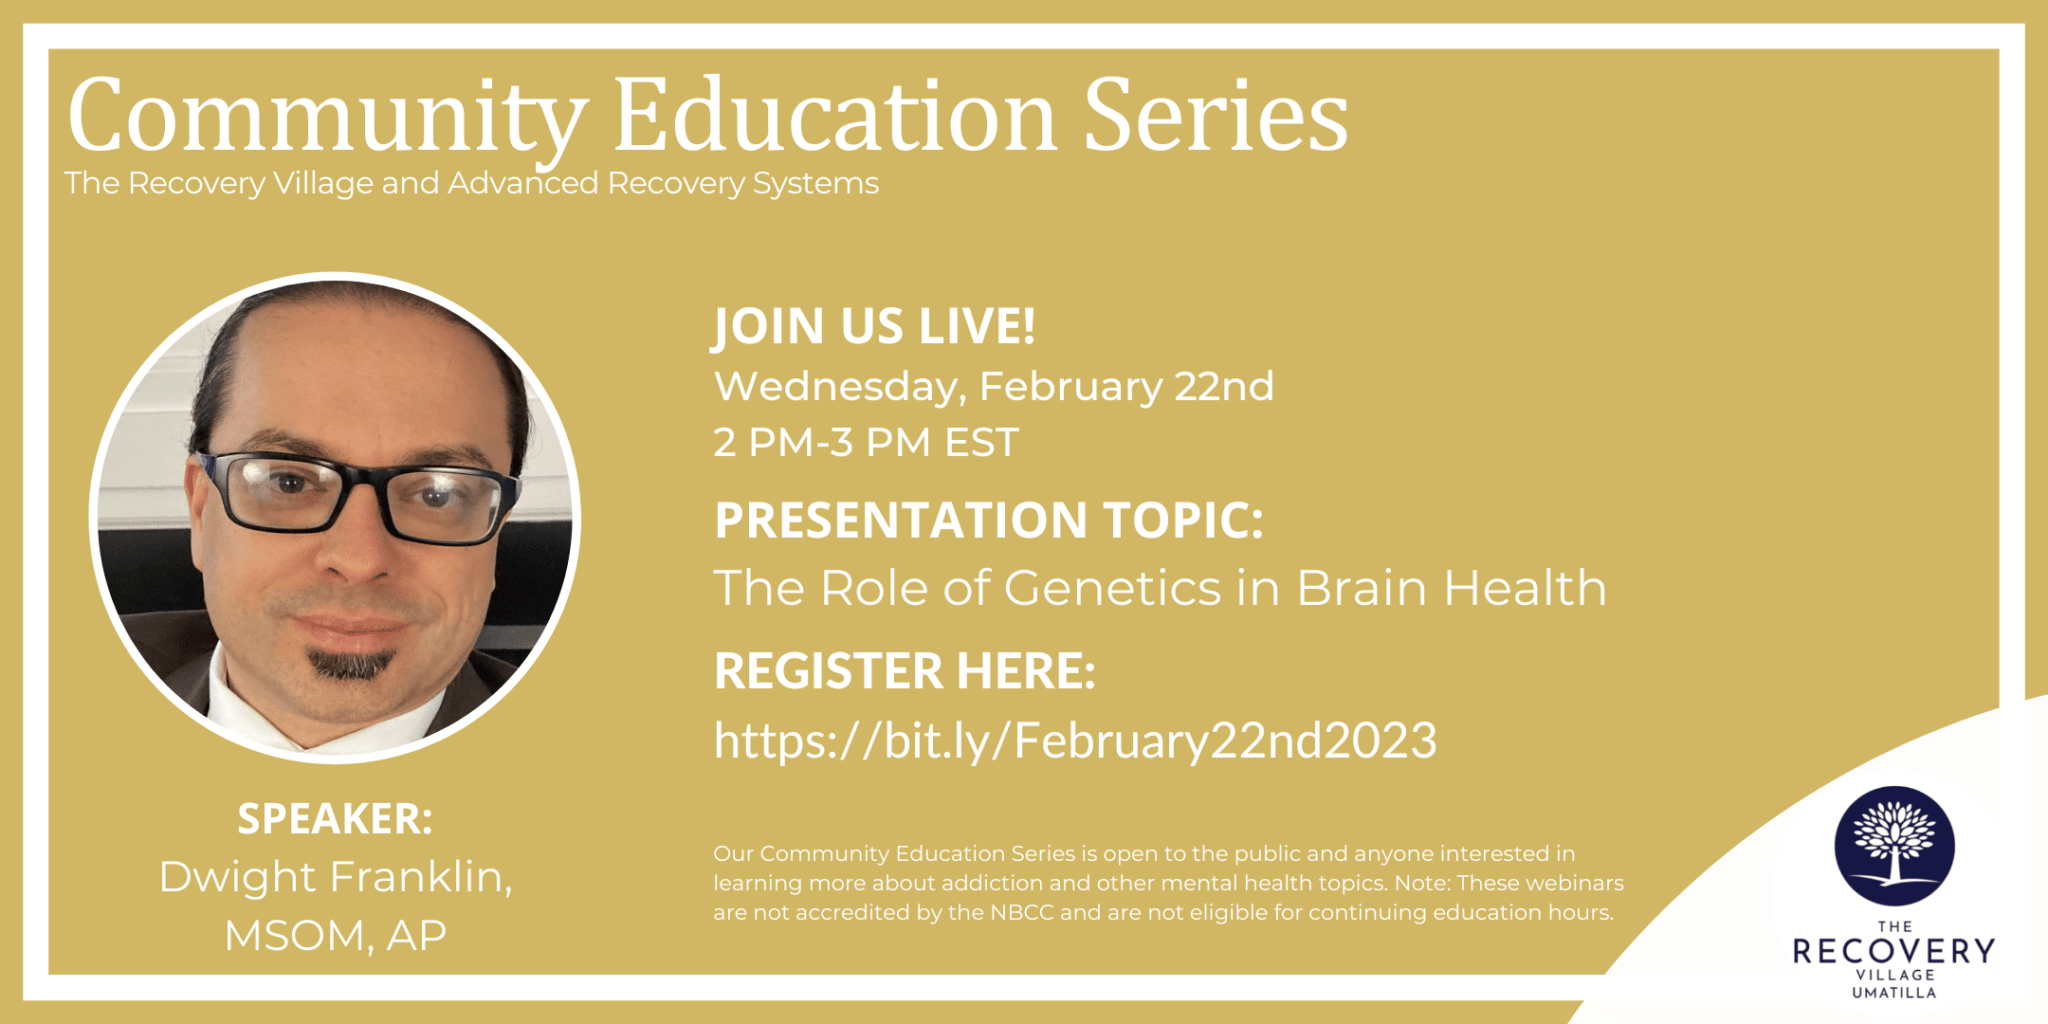 Community Education Series: The Role of Genetics in Brain Health